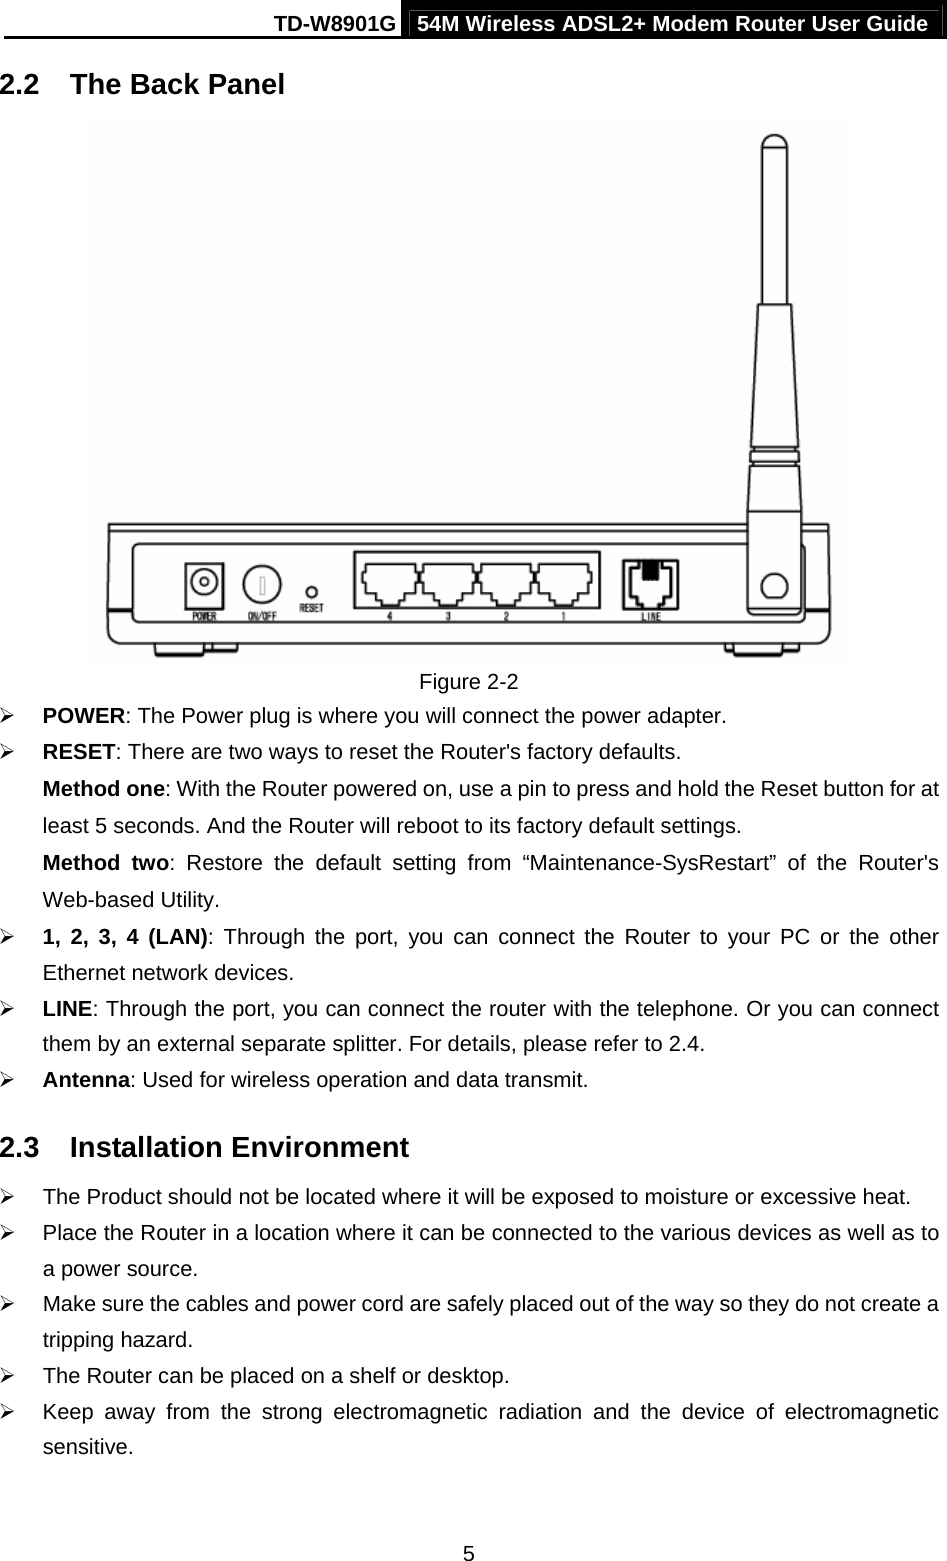 TD-W8901G 54M Wireless ADSL2+ Modem Router User Guide  52.2  The Back Panel  Figure 2-2 ¾ POWER: The Power plug is where you will connect the power adapter. ¾ RESET: There are two ways to reset the Router&apos;s factory defaults.   Method one: With the Router powered on, use a pin to press and hold the Reset button for at least 5 seconds. And the Router will reboot to its factory default settings. Method two: Restore the default setting from “Maintenance-SysRestart”  of the Router&apos;s Web-based Utility. ¾ 1, 2, 3, 4 (LAN): Through the port, you can connect the Router to your PC or the other Ethernet network devices. ¾ LINE: Through the port, you can connect the router with the telephone. Or you can connect them by an external separate splitter. For details, please refer to 2.4. ¾ Antenna: Used for wireless operation and data transmit. 2.3  Installation Environment ¾  The Product should not be located where it will be exposed to moisture or excessive heat. ¾  Place the Router in a location where it can be connected to the various devices as well as to a power source. ¾  Make sure the cables and power cord are safely placed out of the way so they do not create a tripping hazard. ¾  The Router can be placed on a shelf or desktop. ¾  Keep away from the strong electromagnetic radiation and the device of electromagnetic sensitive. 